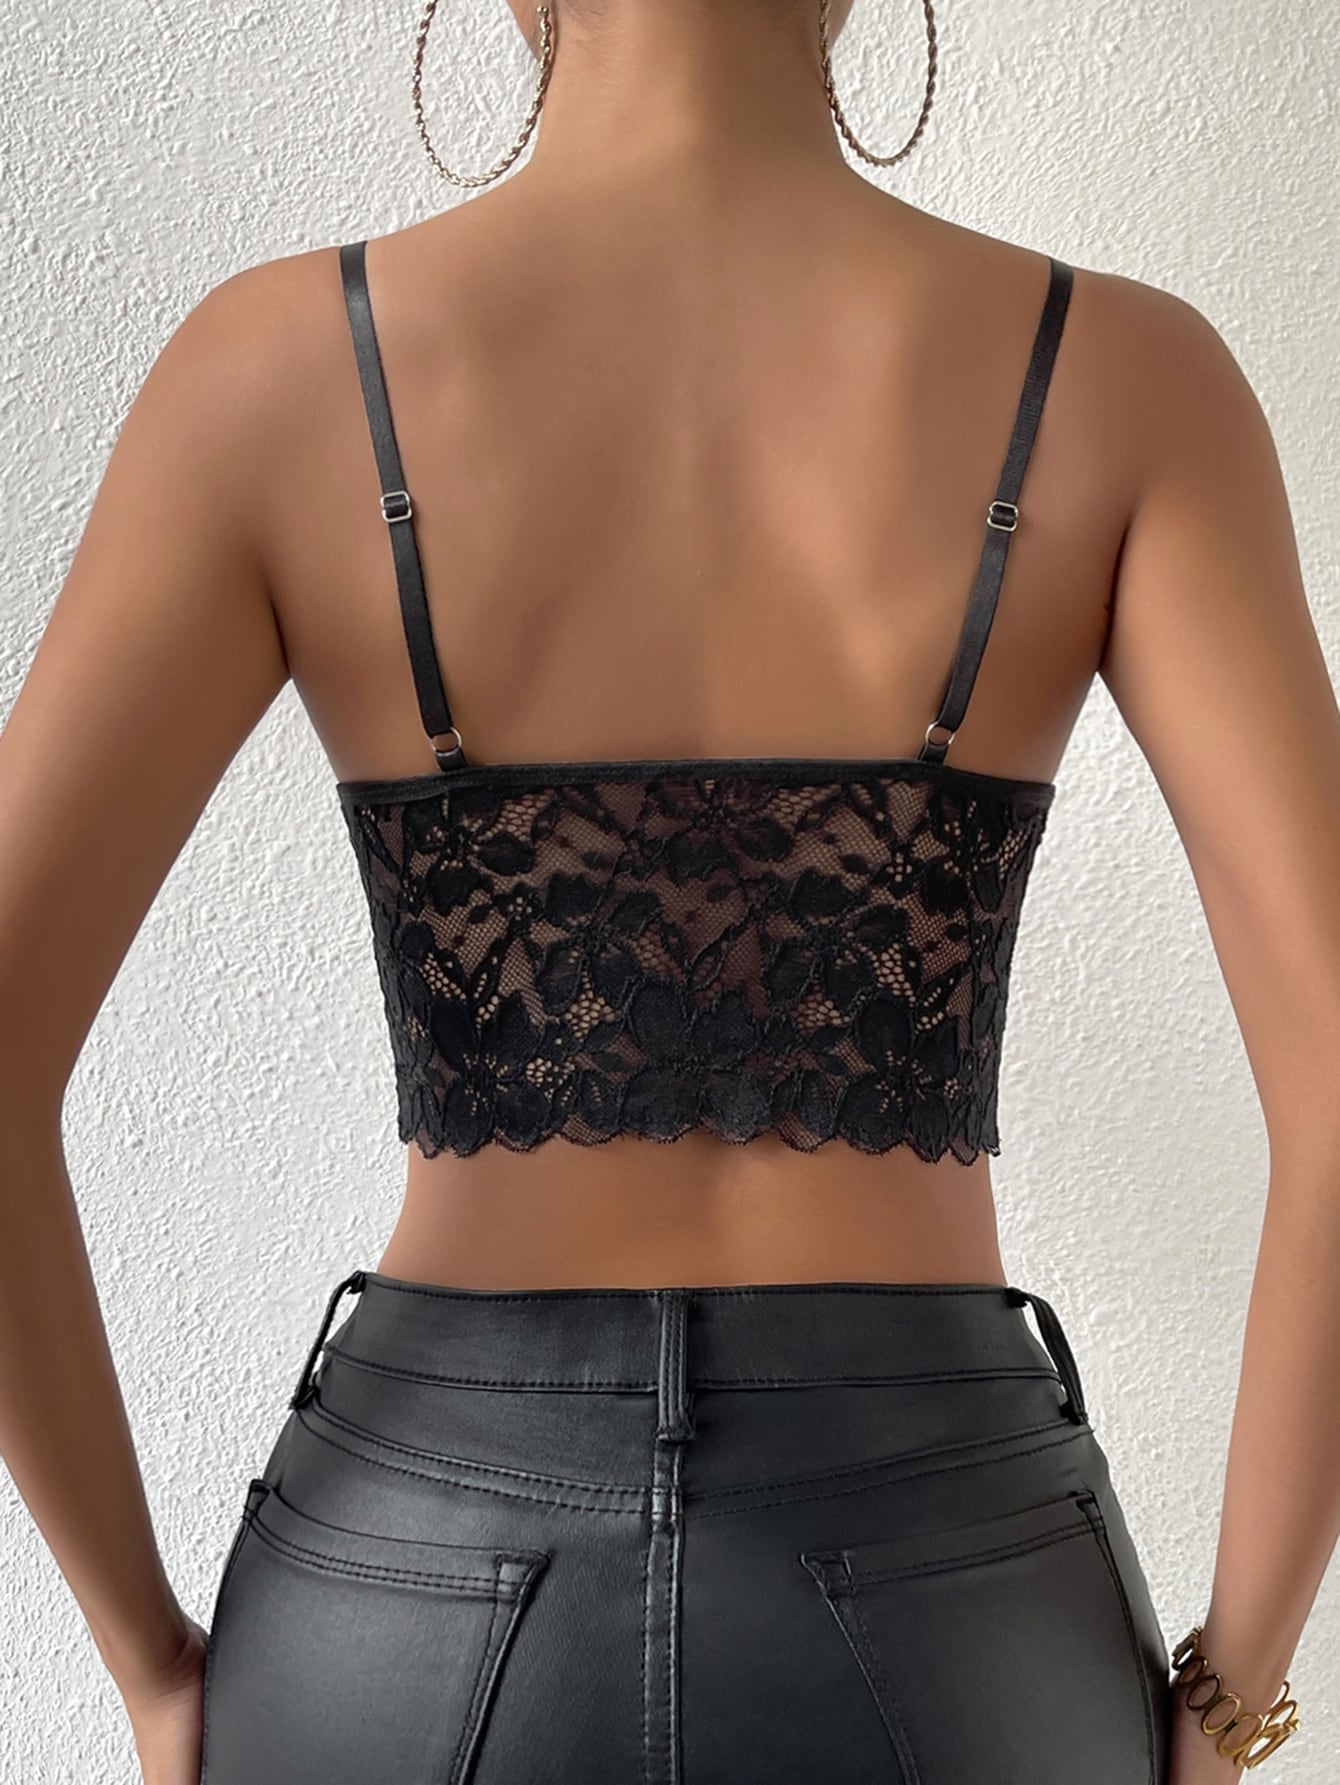 SheIn Lace Insert Bustier Cami Bodysuit Black Size M - $10 (23% Off Retail)  New With Tags - From Nicole